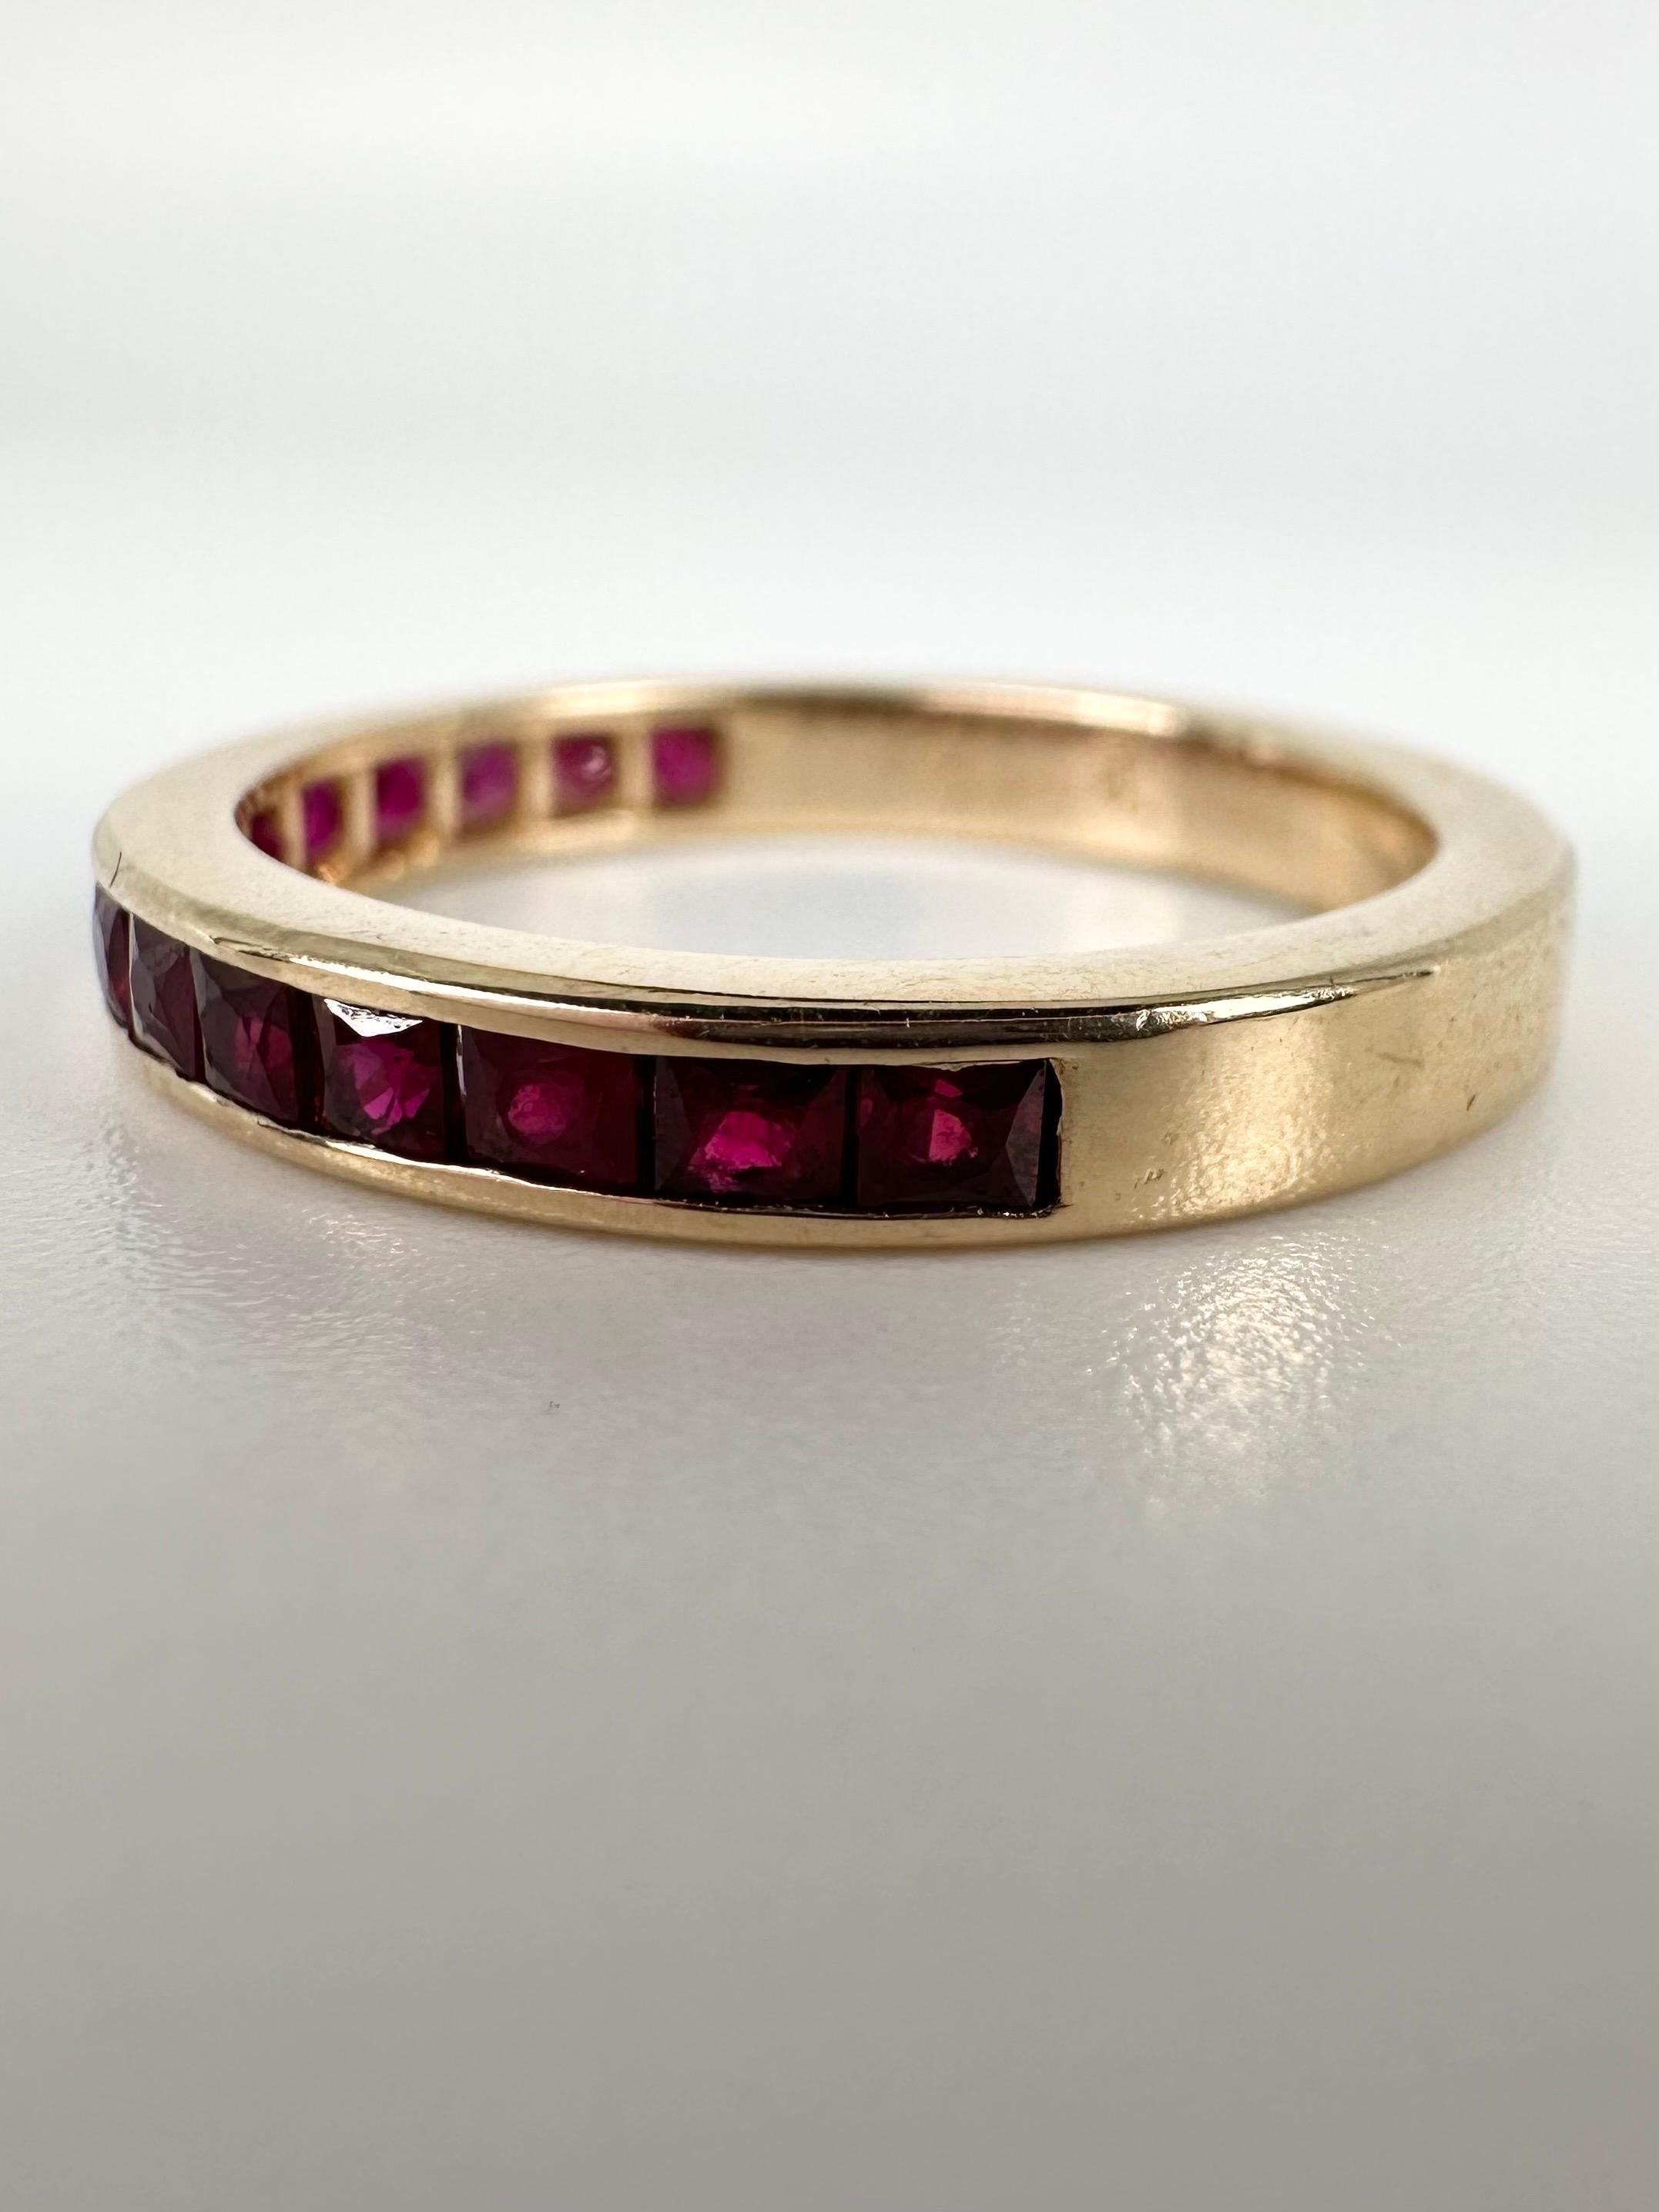 Channel set wedding band made with stunning pinkish red rubies(100% natural rubies) in 14KT gold. This ring is dainty with the most amazing sparkle and vivid pink color from the rubies!

GOLD: 14KT gold
NATURAL RUBY(S)
Size of the